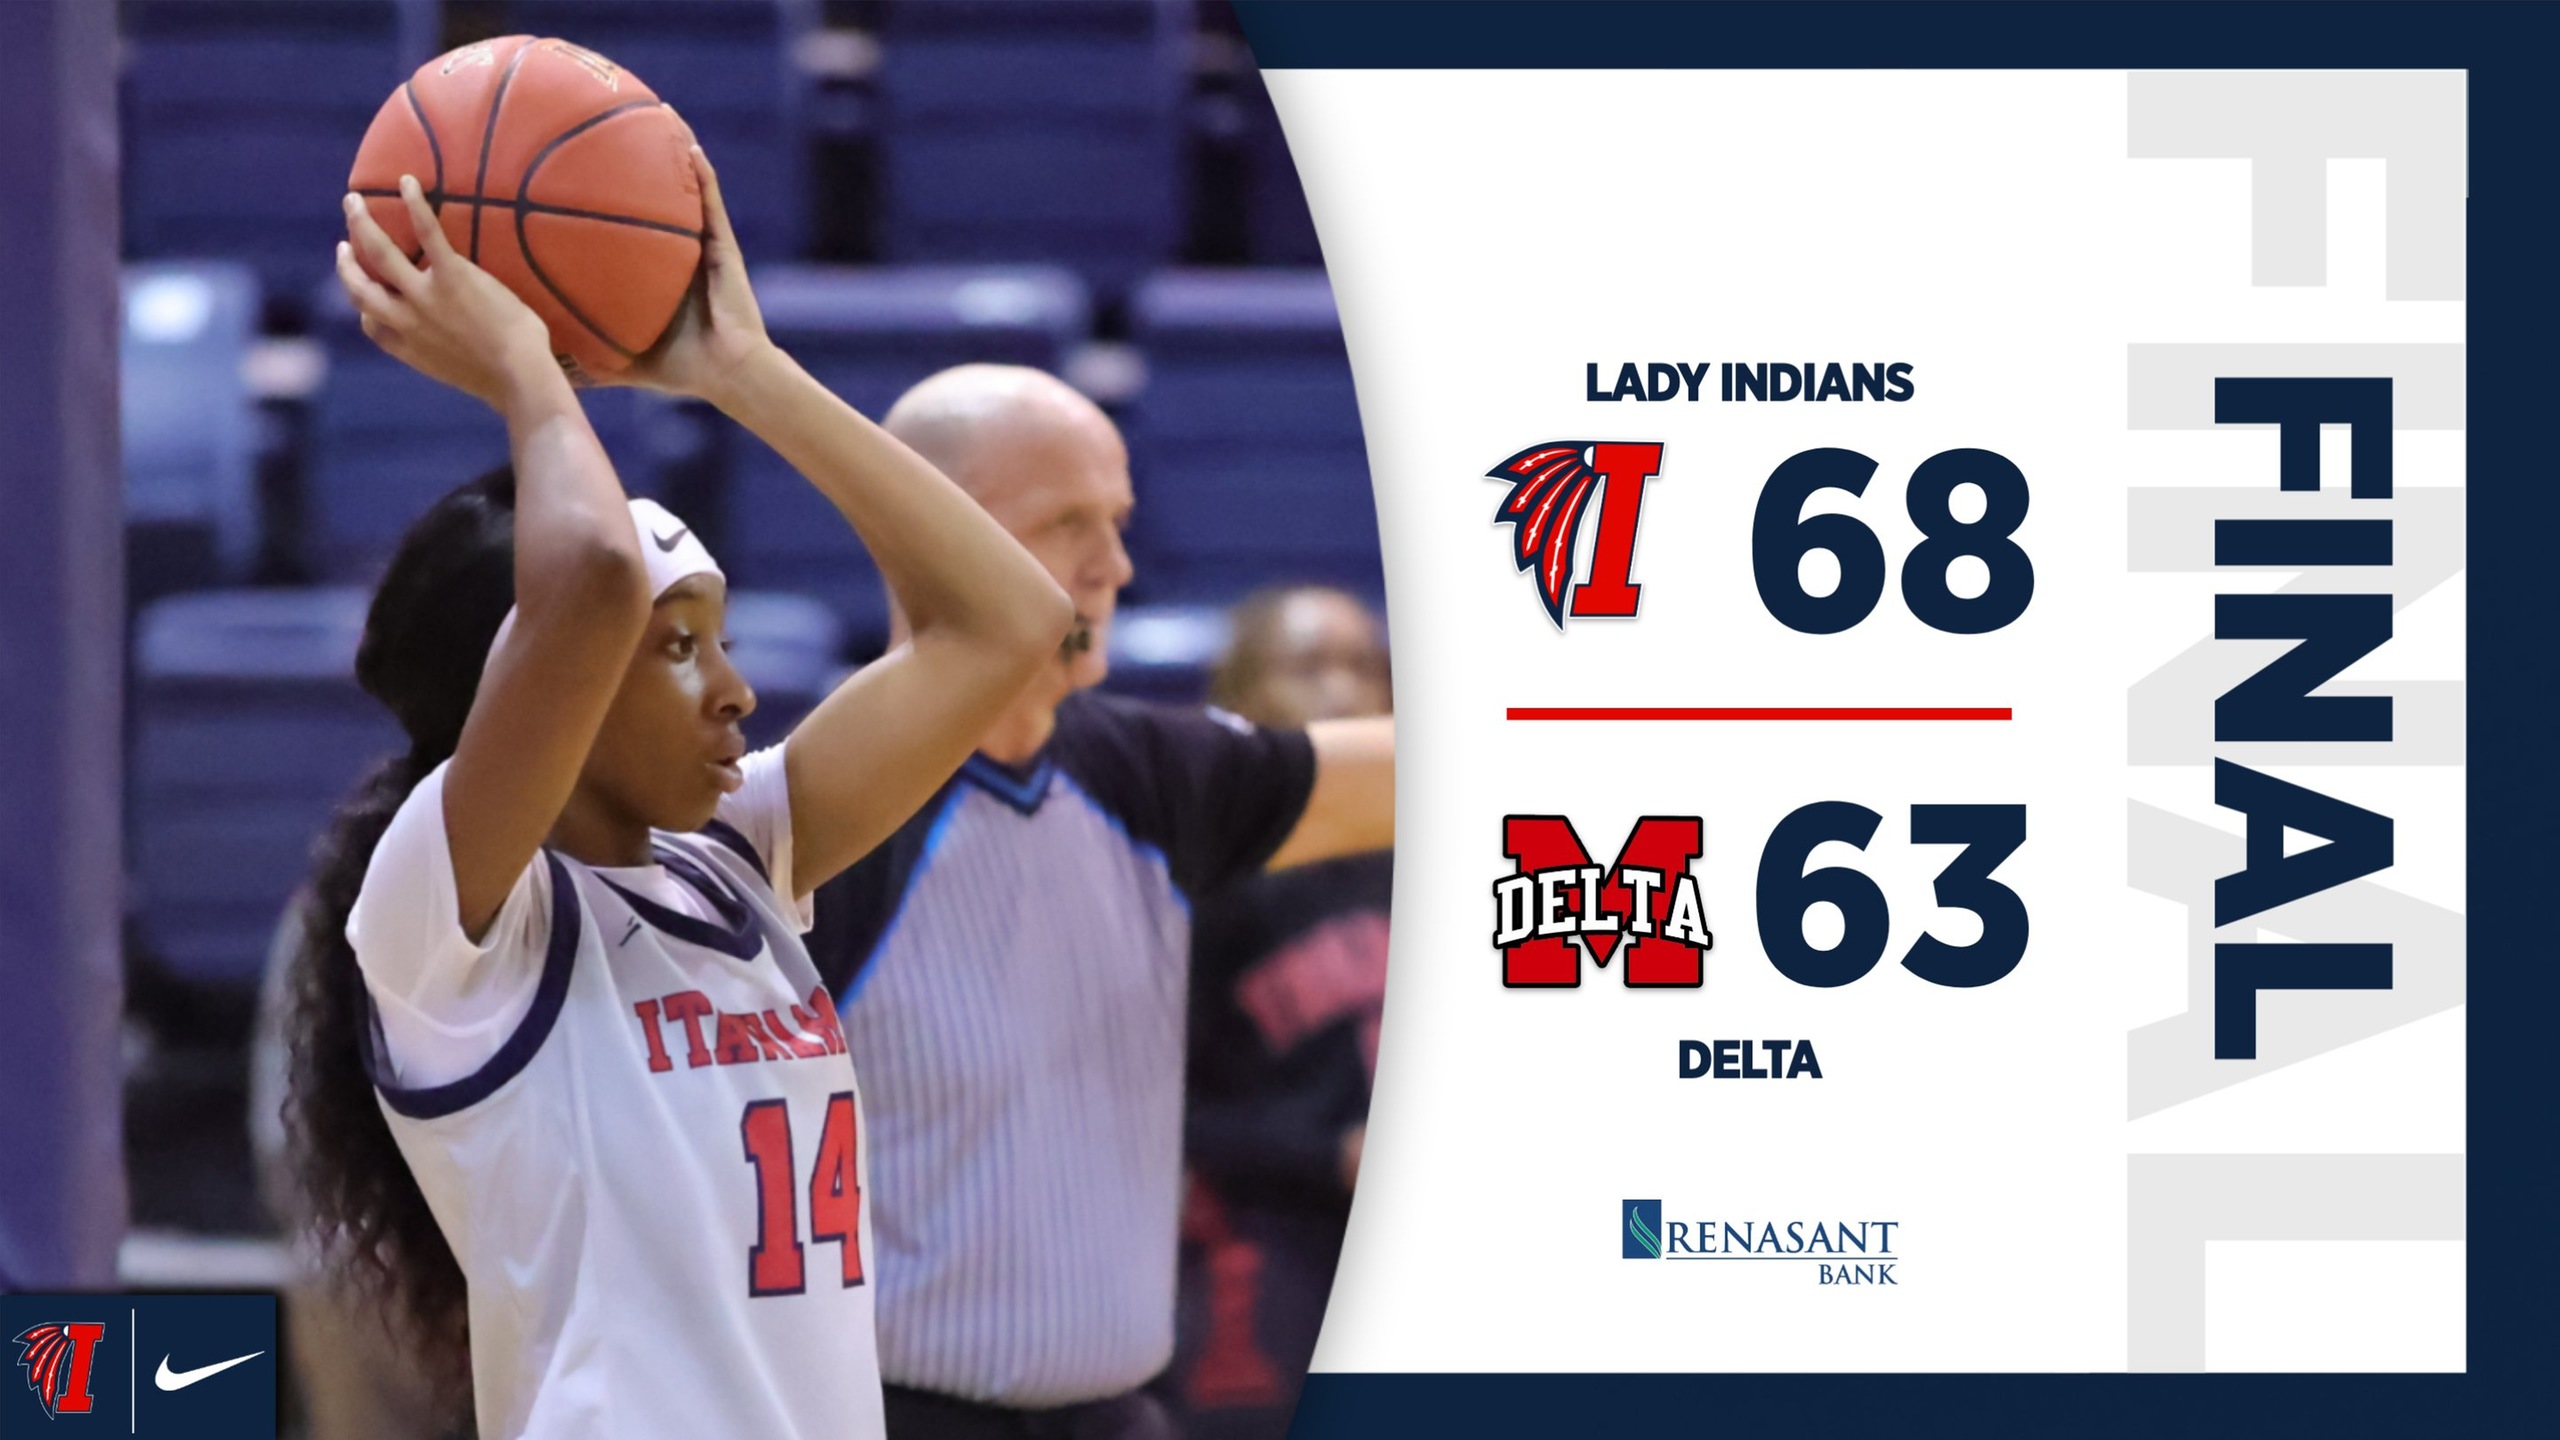 Lady Indians earn hard-fought victory over Delta, 68-63